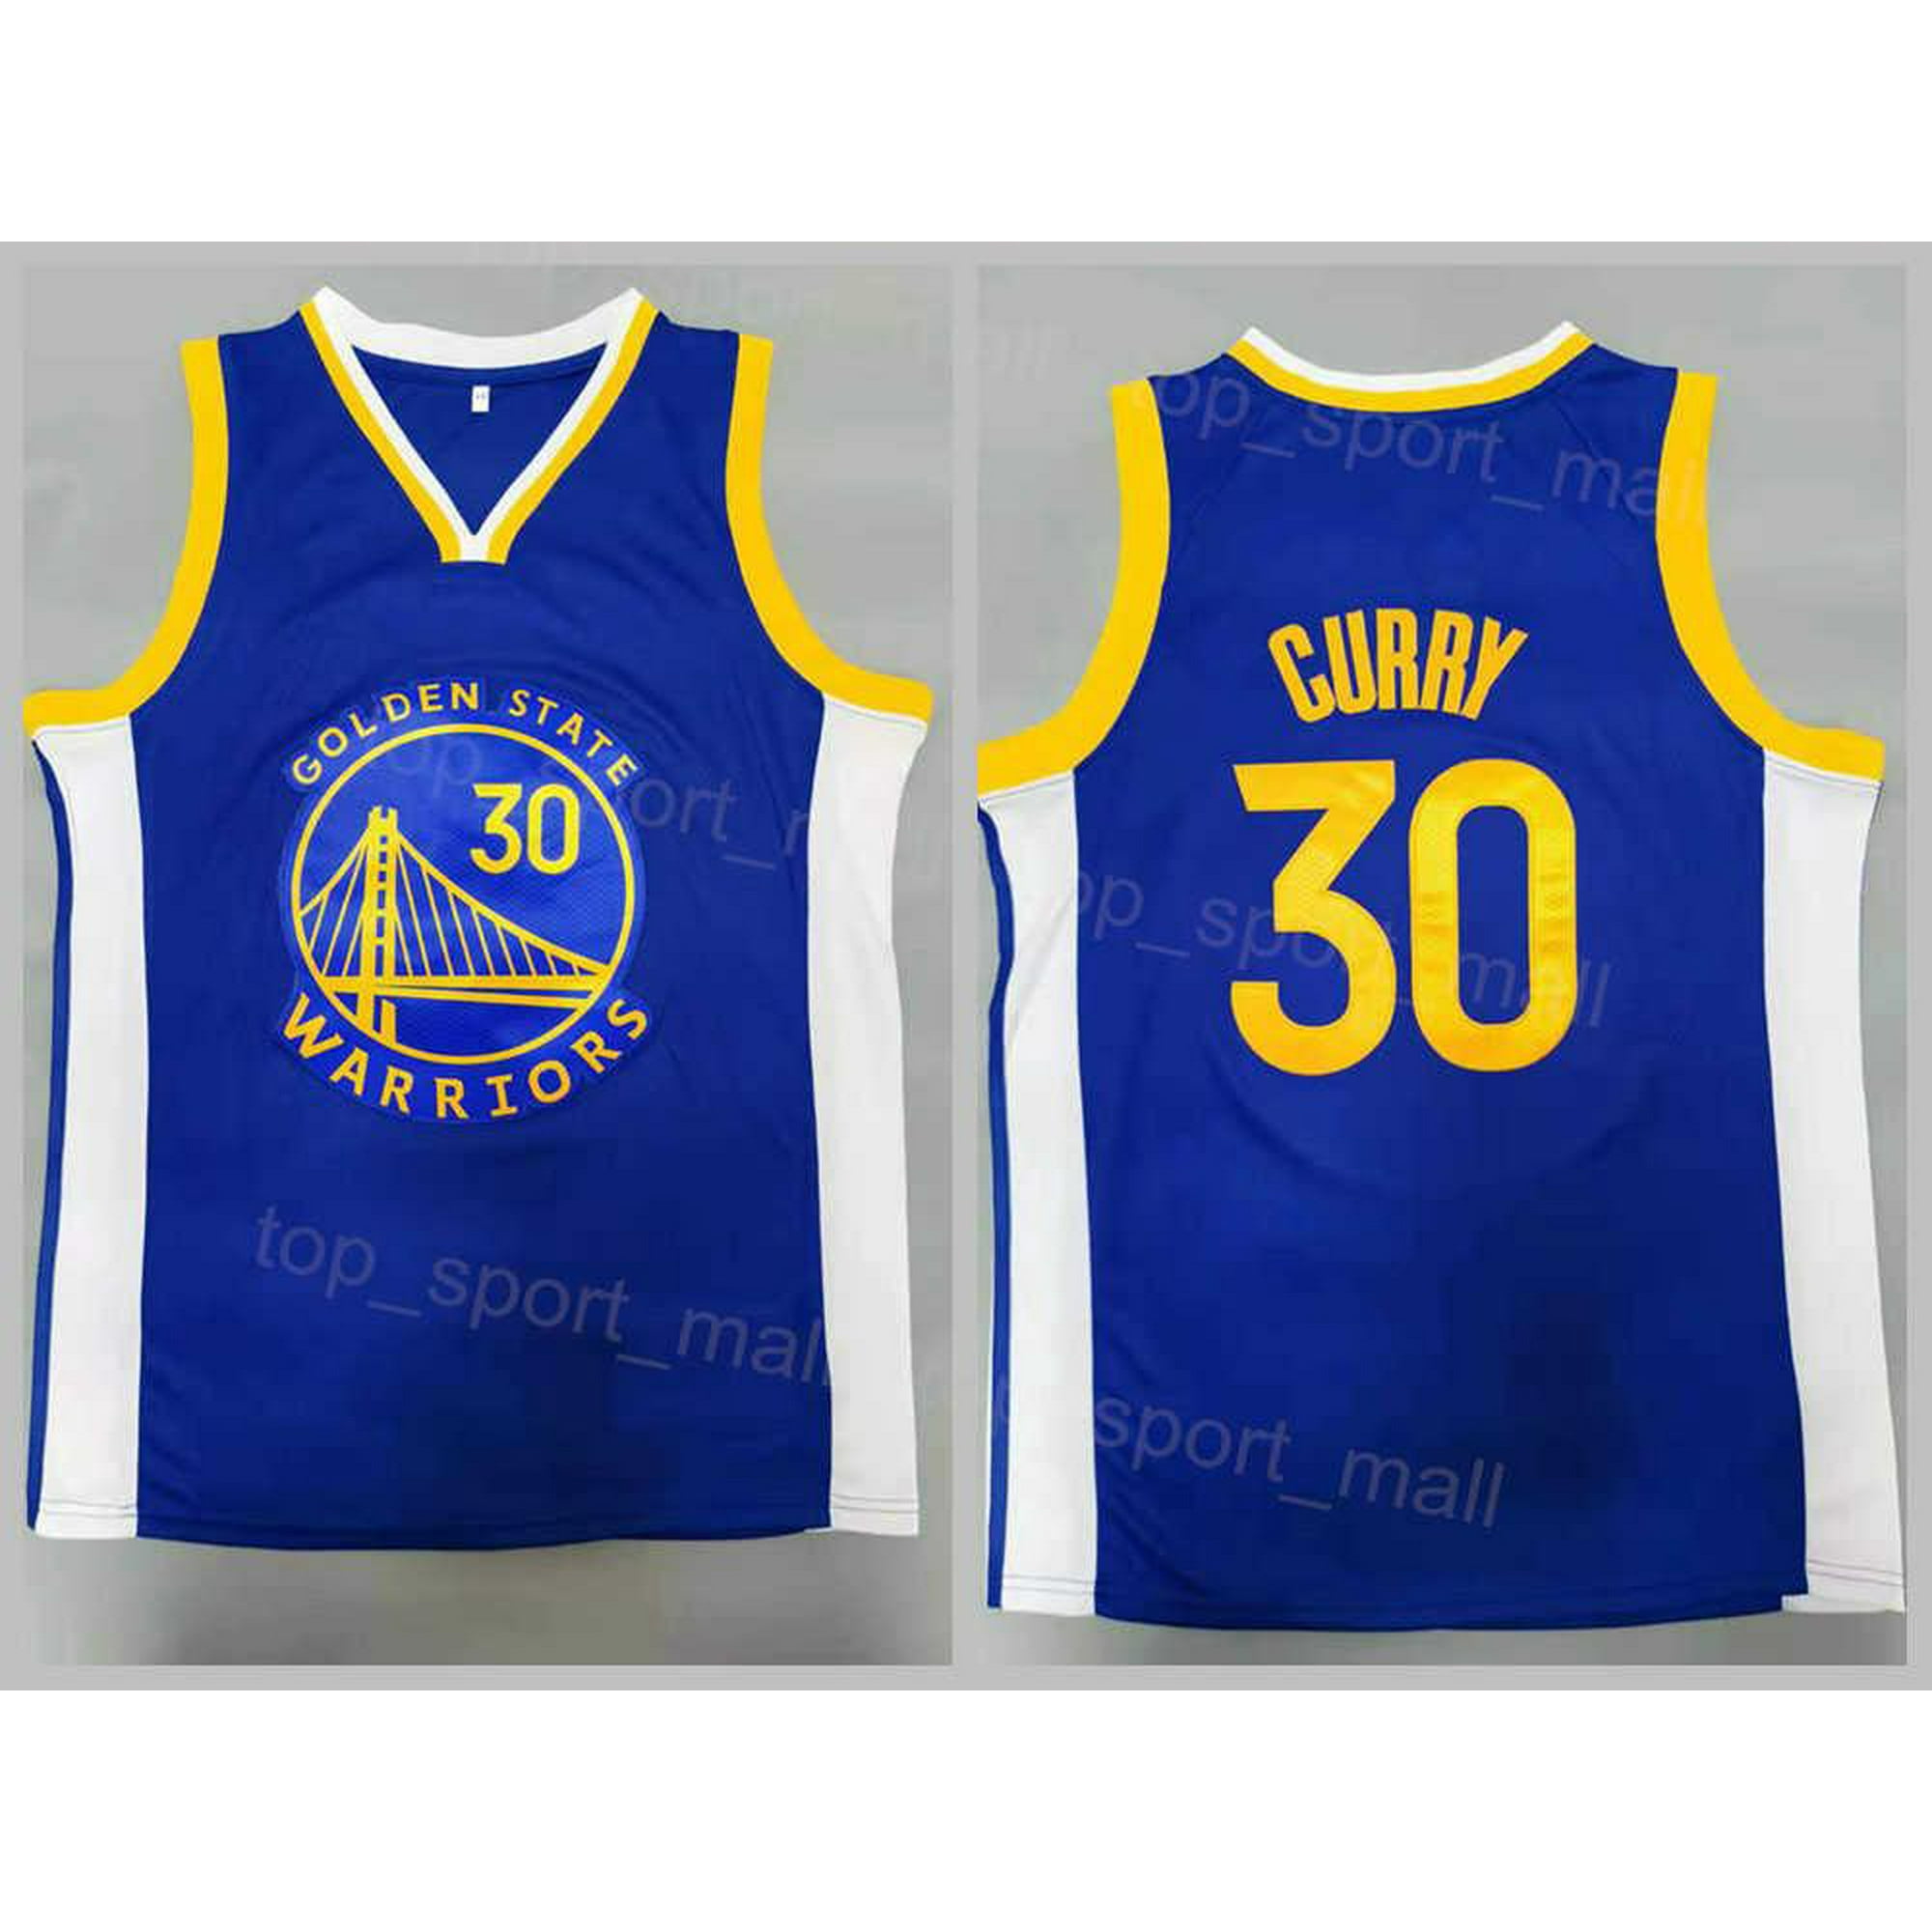 2019 All Star Game Warriors 30 Stephen Curry Black Gold Basketball Jersey